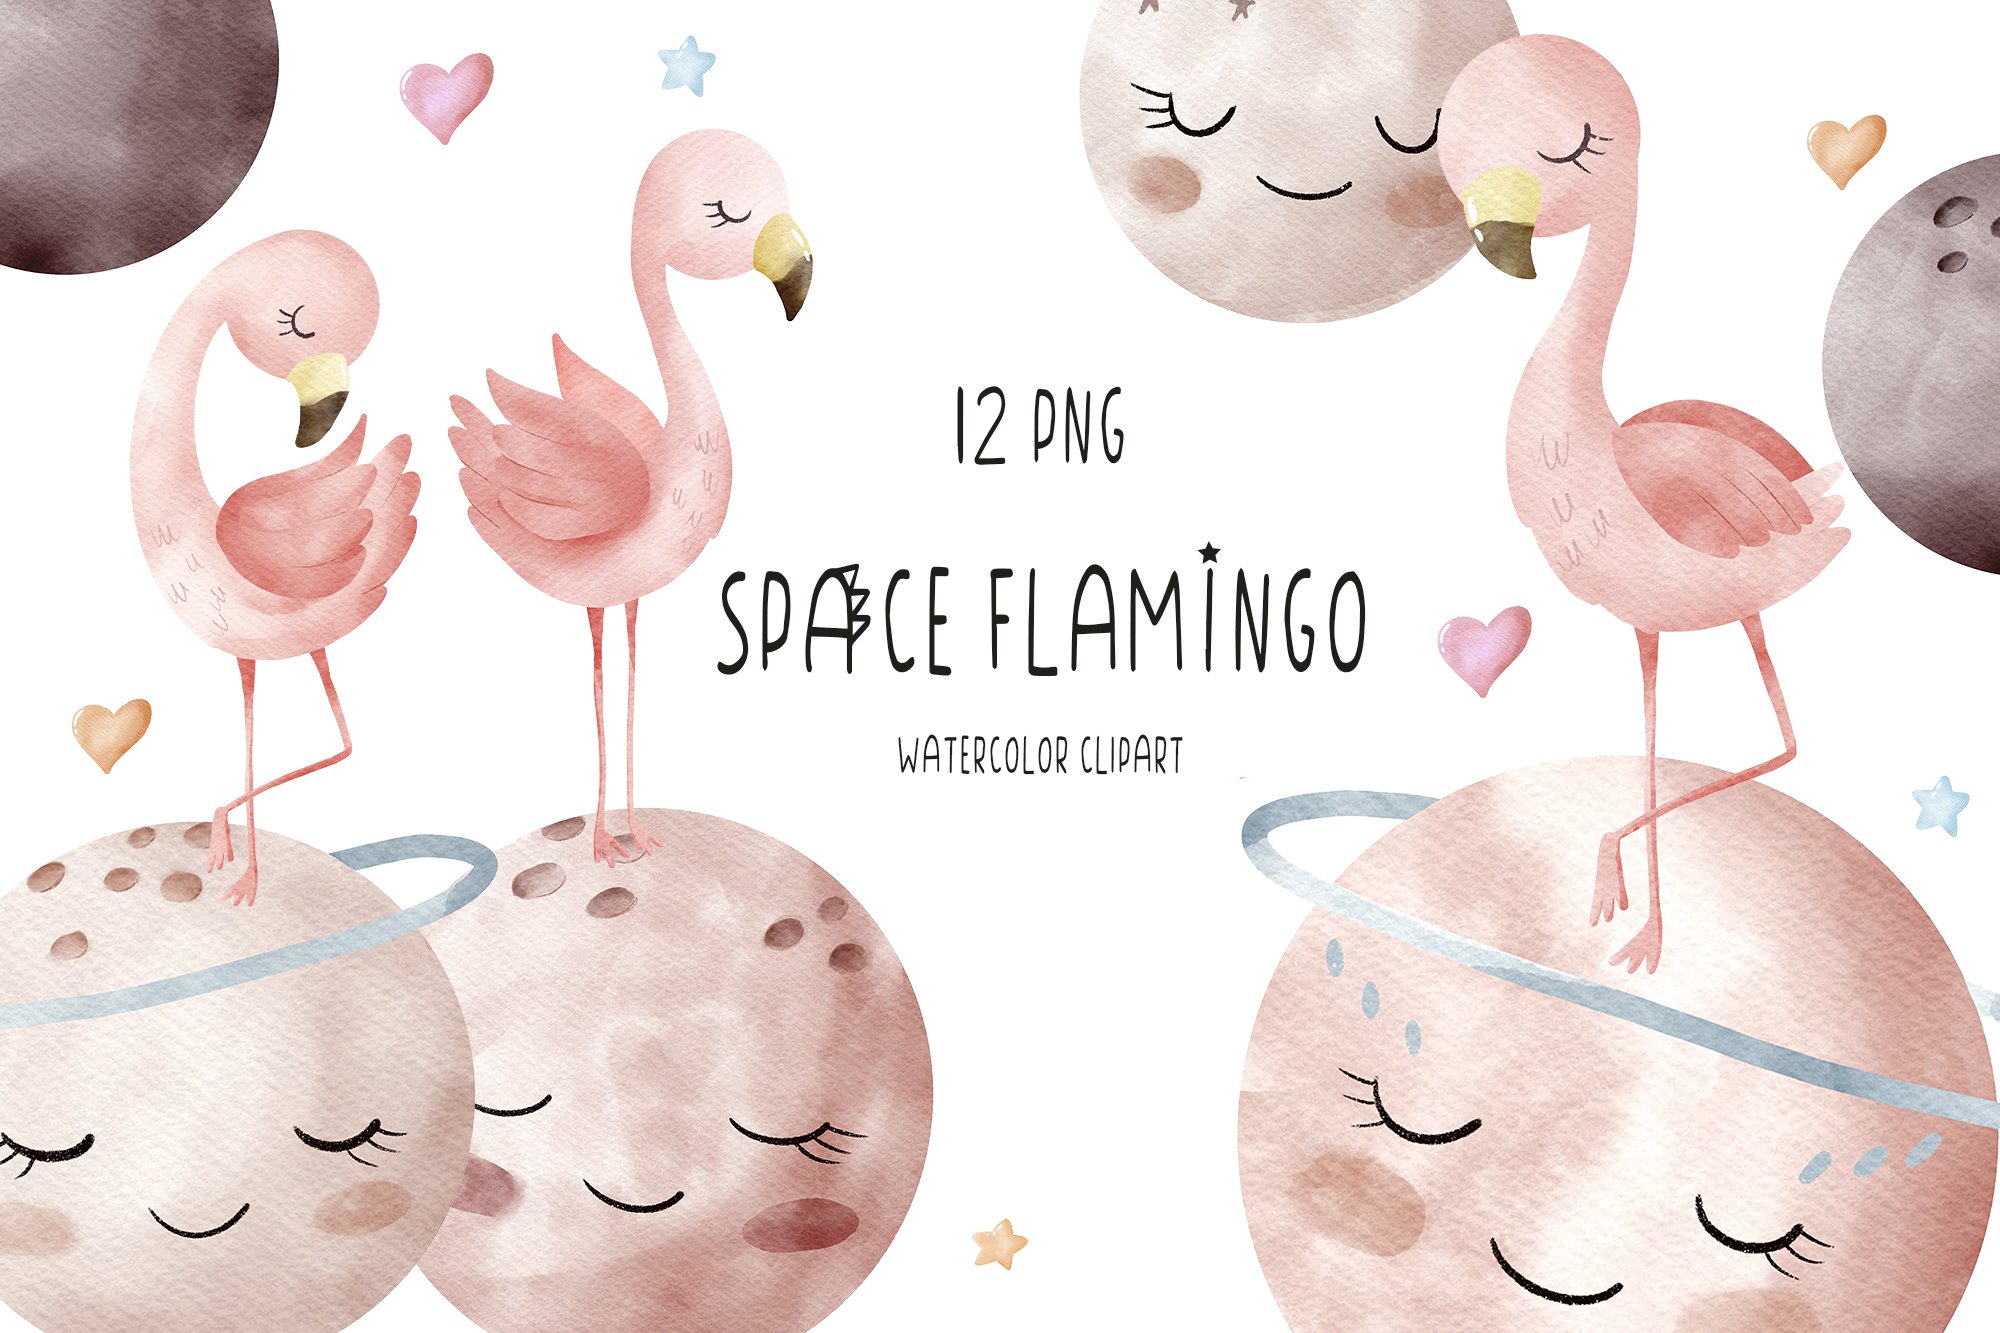 Watercolor Space flamingo clipart cover image.